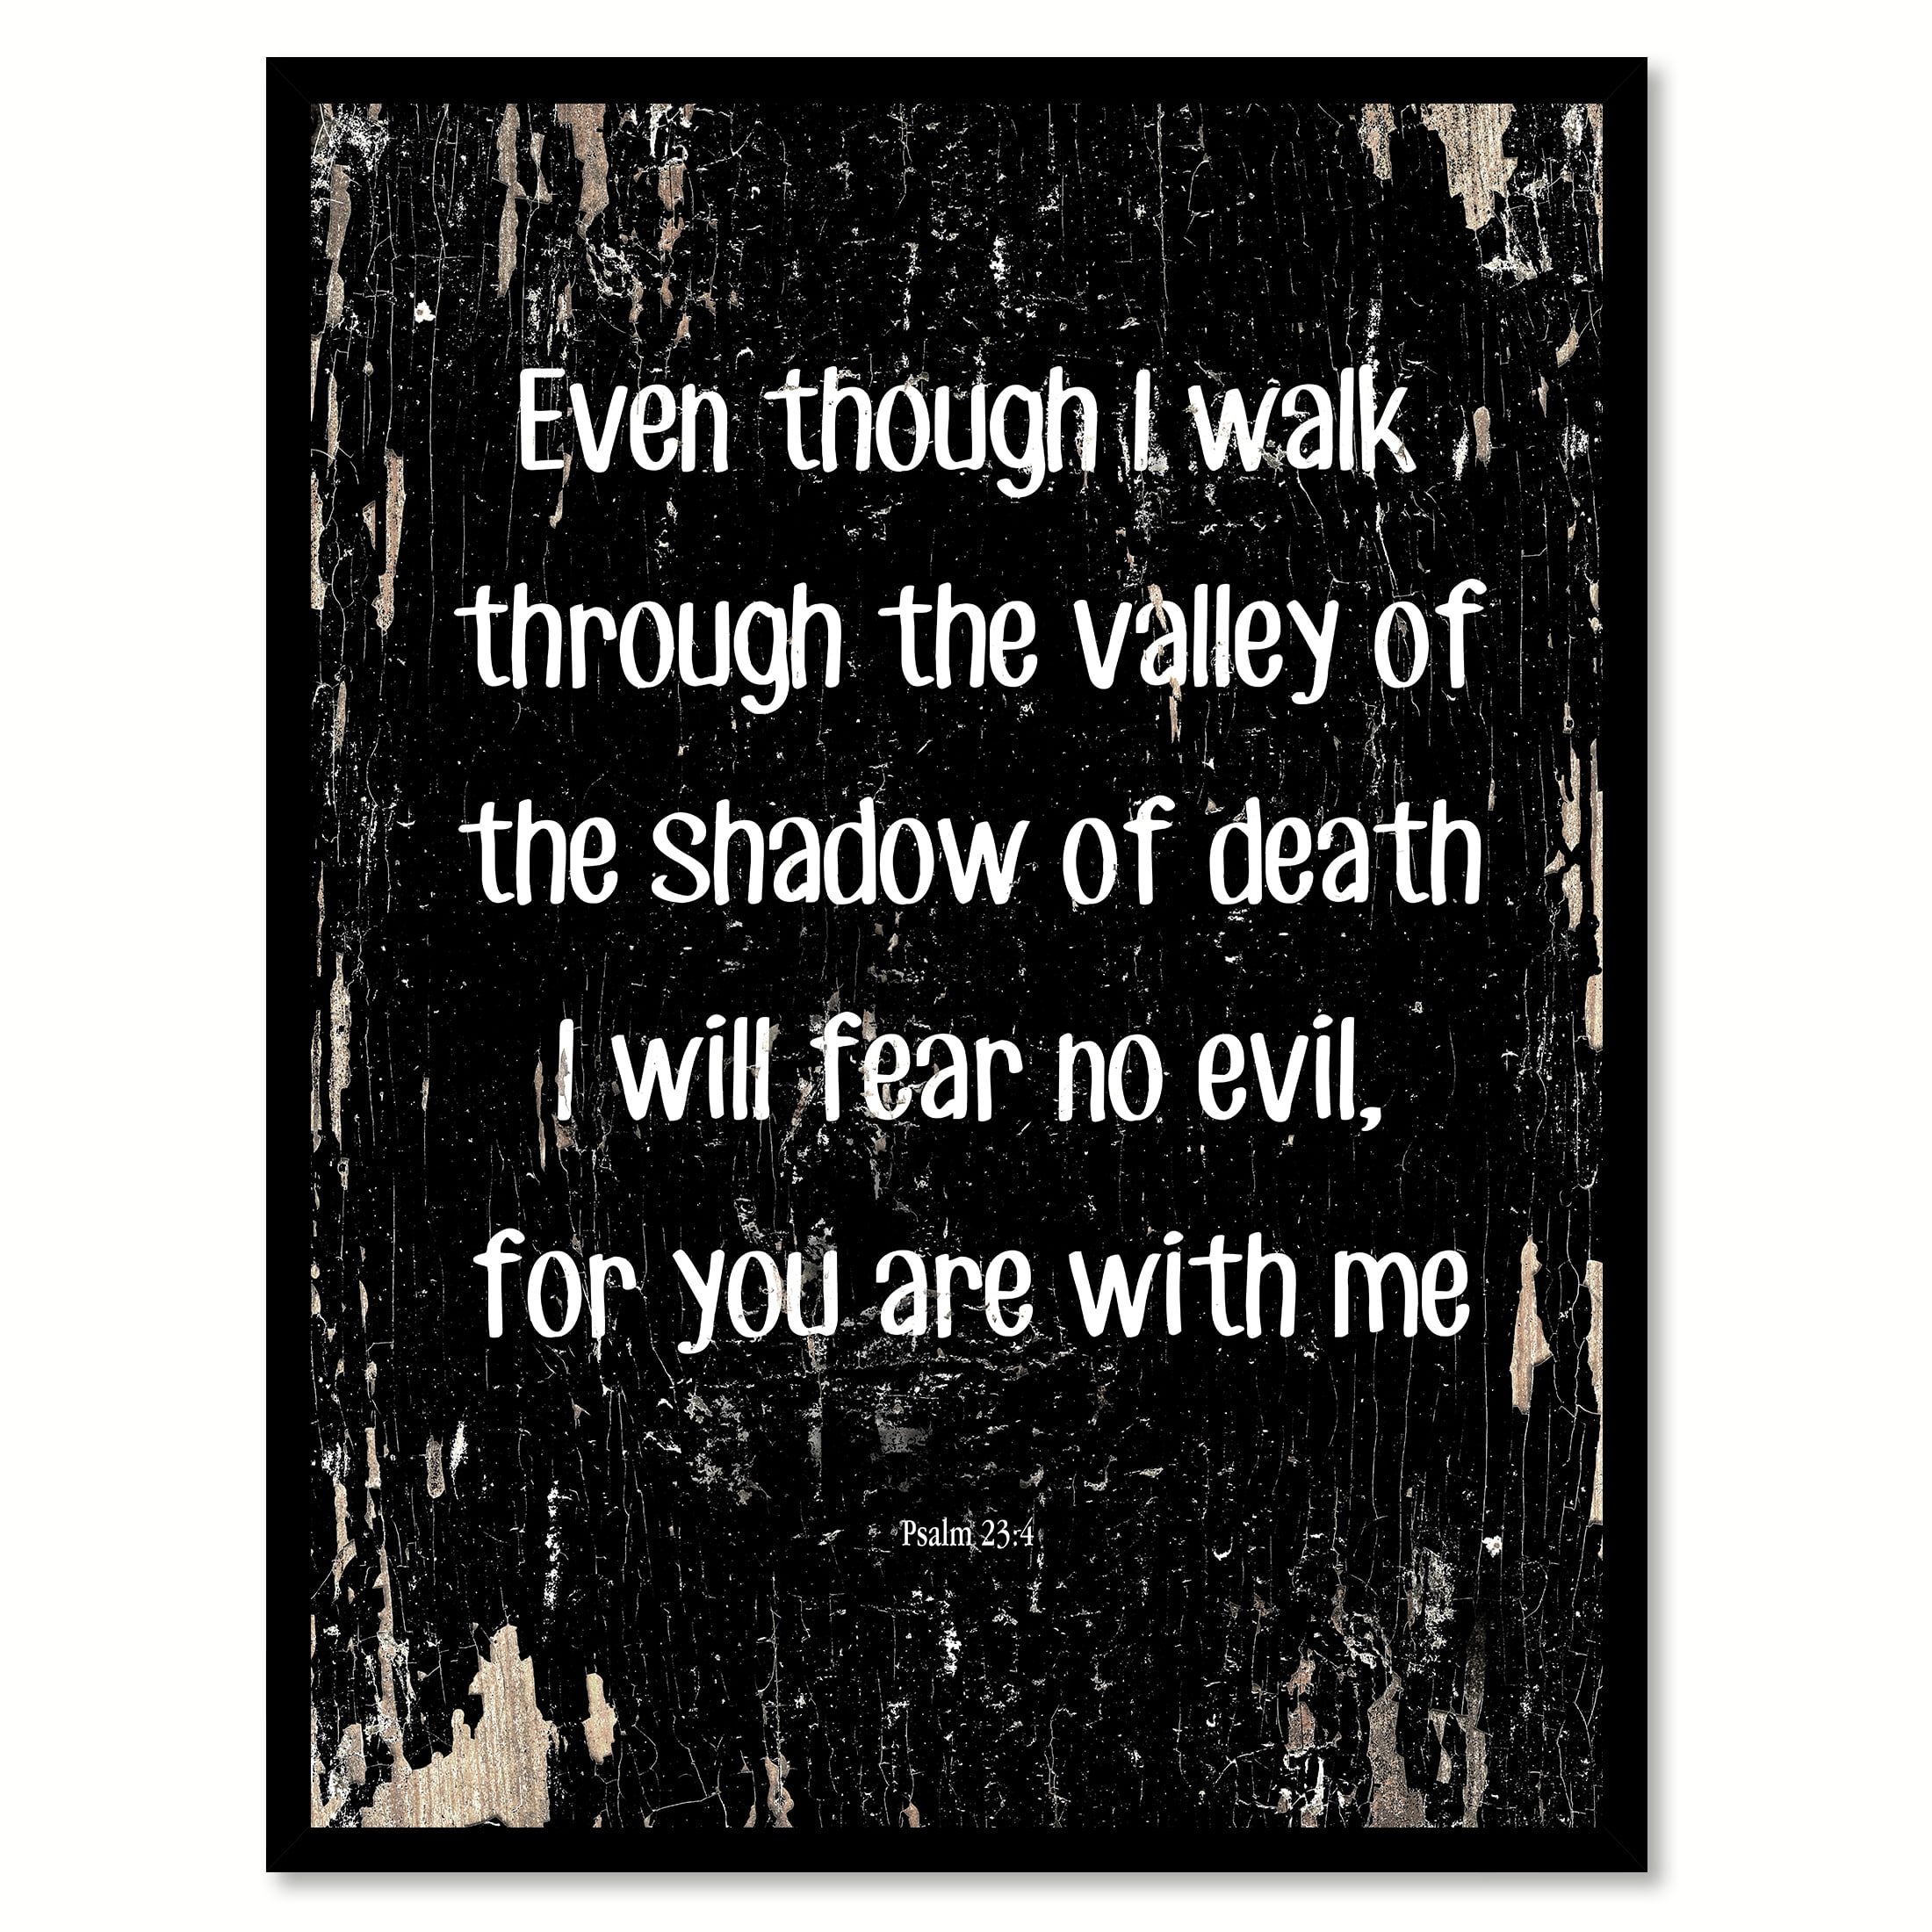 Tarif Decode En trofast Even though I walk through the valley of the shadow of death I will fear no  evil for you are with me - Psalm 23:4 Religious Quote Saying Black Canvas  Print with